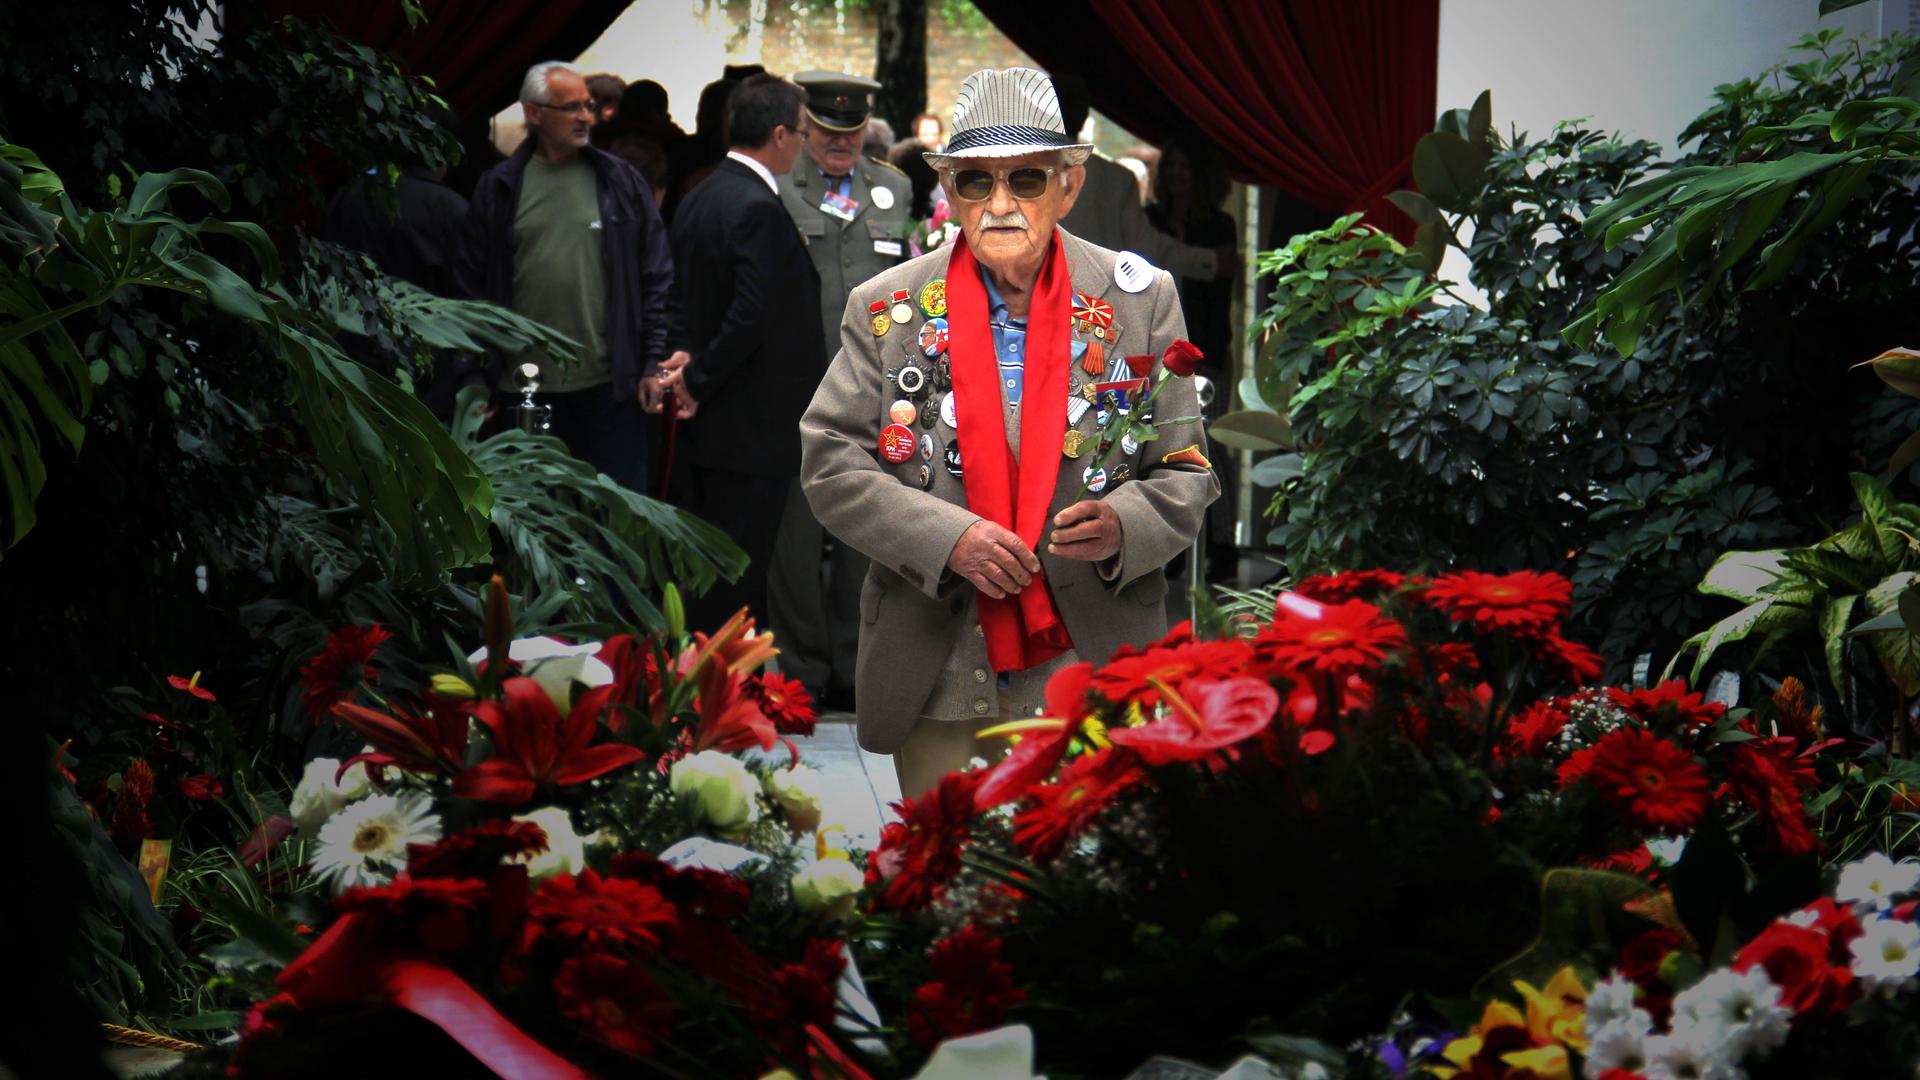 Antonije Nedelkovski, decorated with war medals, fondly recalls his days fighting for Josip Broz Tito in WWII. Here he visits Tito's grave in Belgrade.